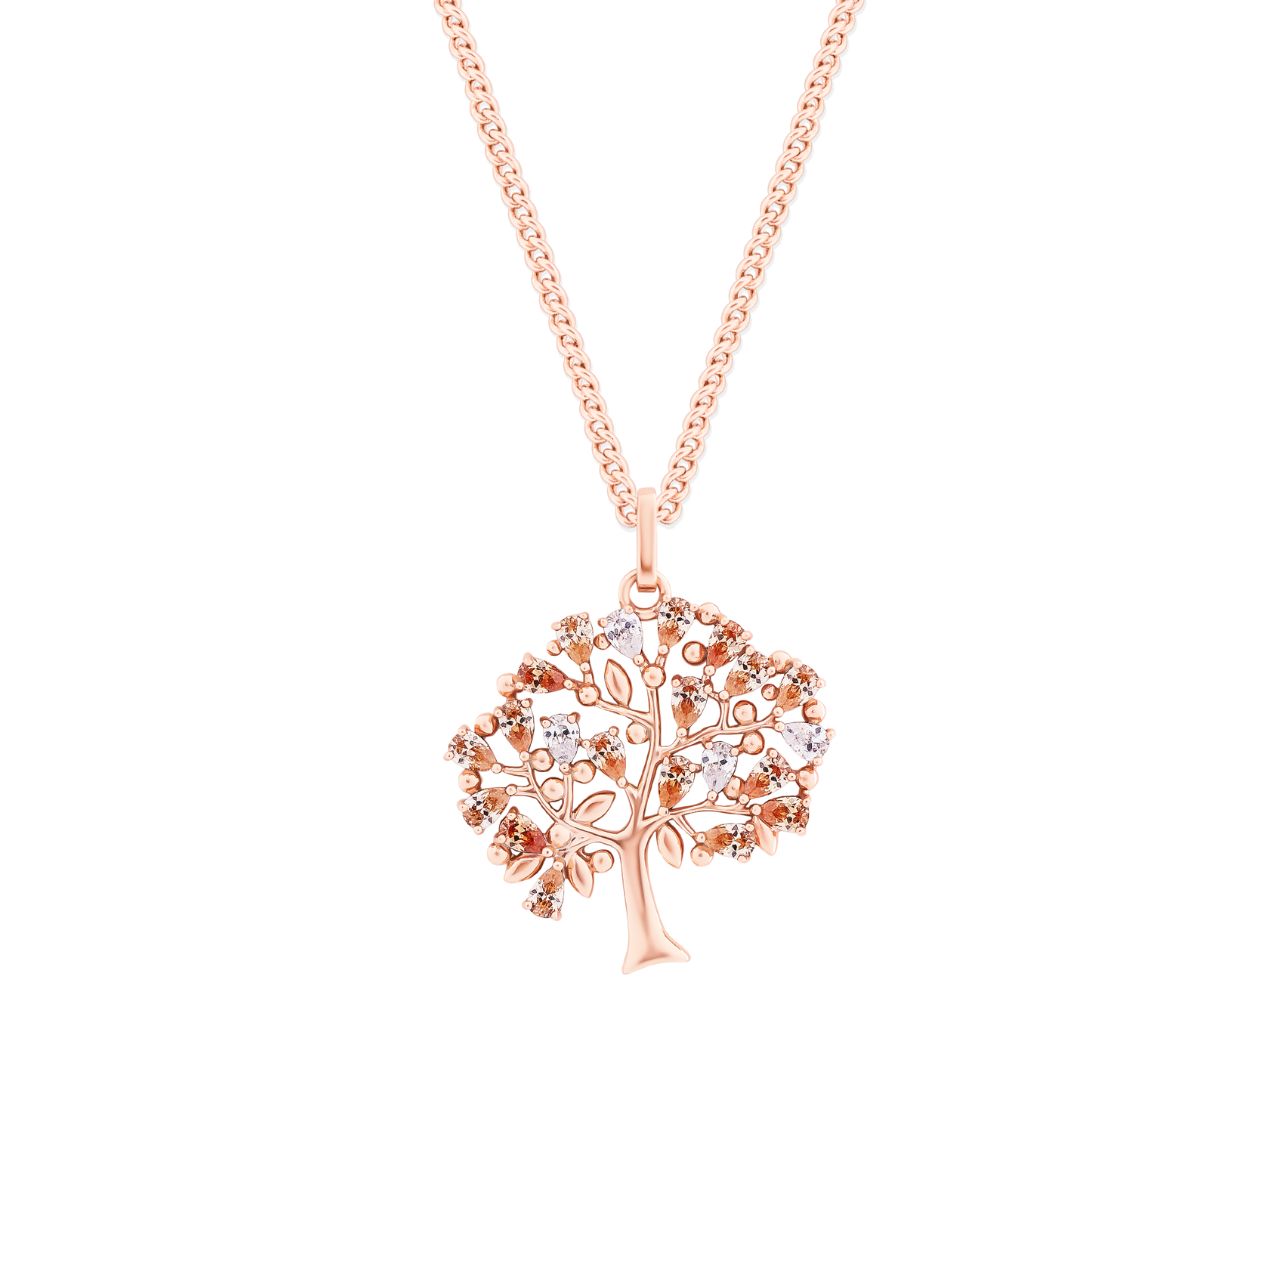 Tipperary Crystal Tree of Life & Clear Tear Drop CZ Rose Gold Pendant  The tree of life is a symbol of a fresh start on life, positive energy, good health and a bright future. The symbolism of the Tree of Life is ultimately about the forces of nature combining to create balance and harmony. The branches reach for the sky, the roots reach down into the ground.